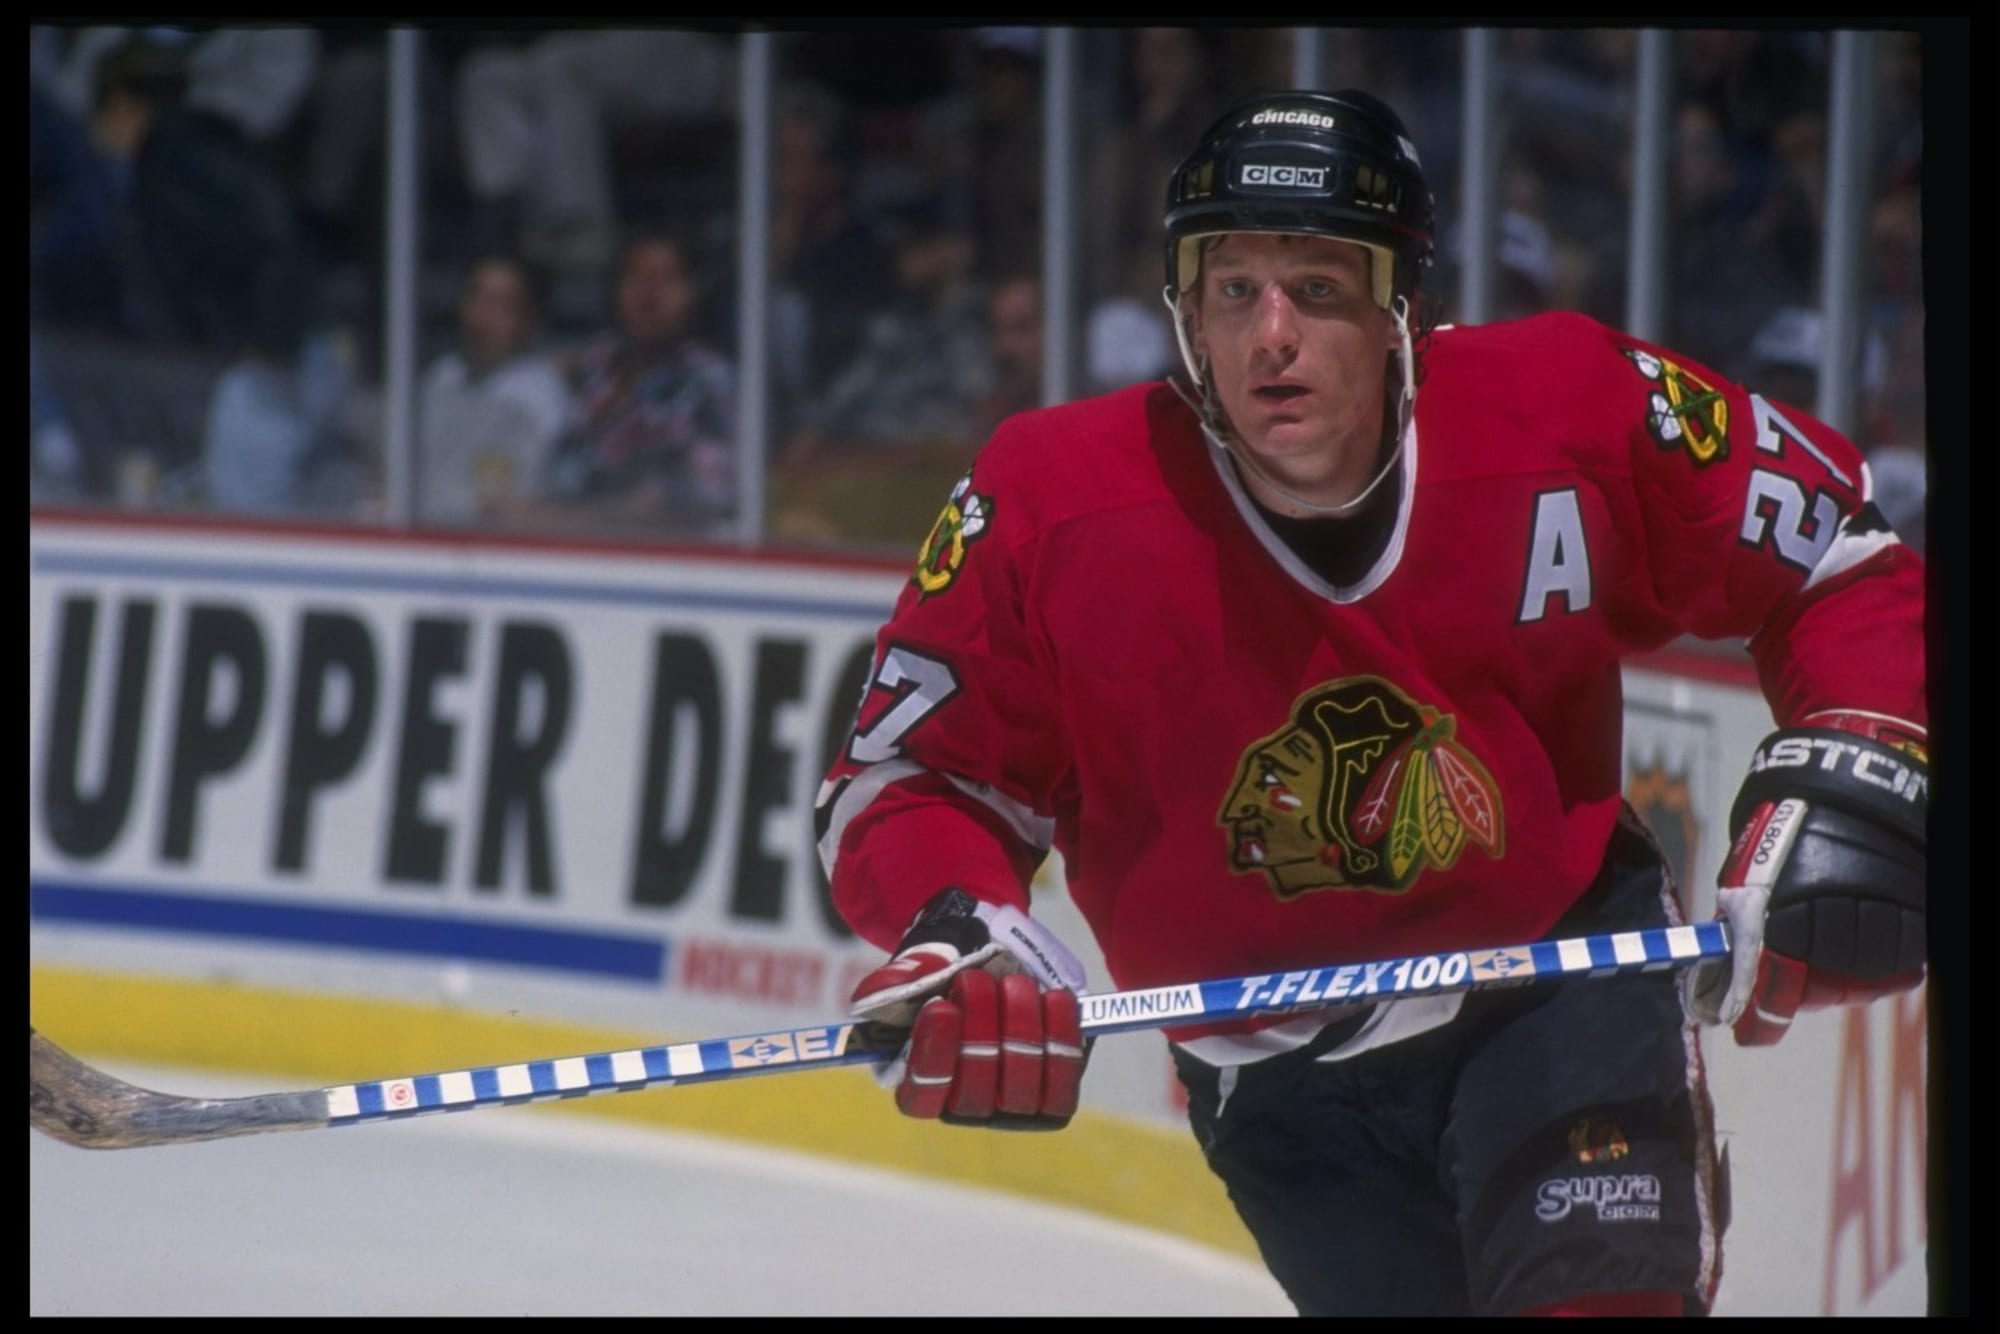 Not in Hall of Fame - 18. Jeremy Roenick